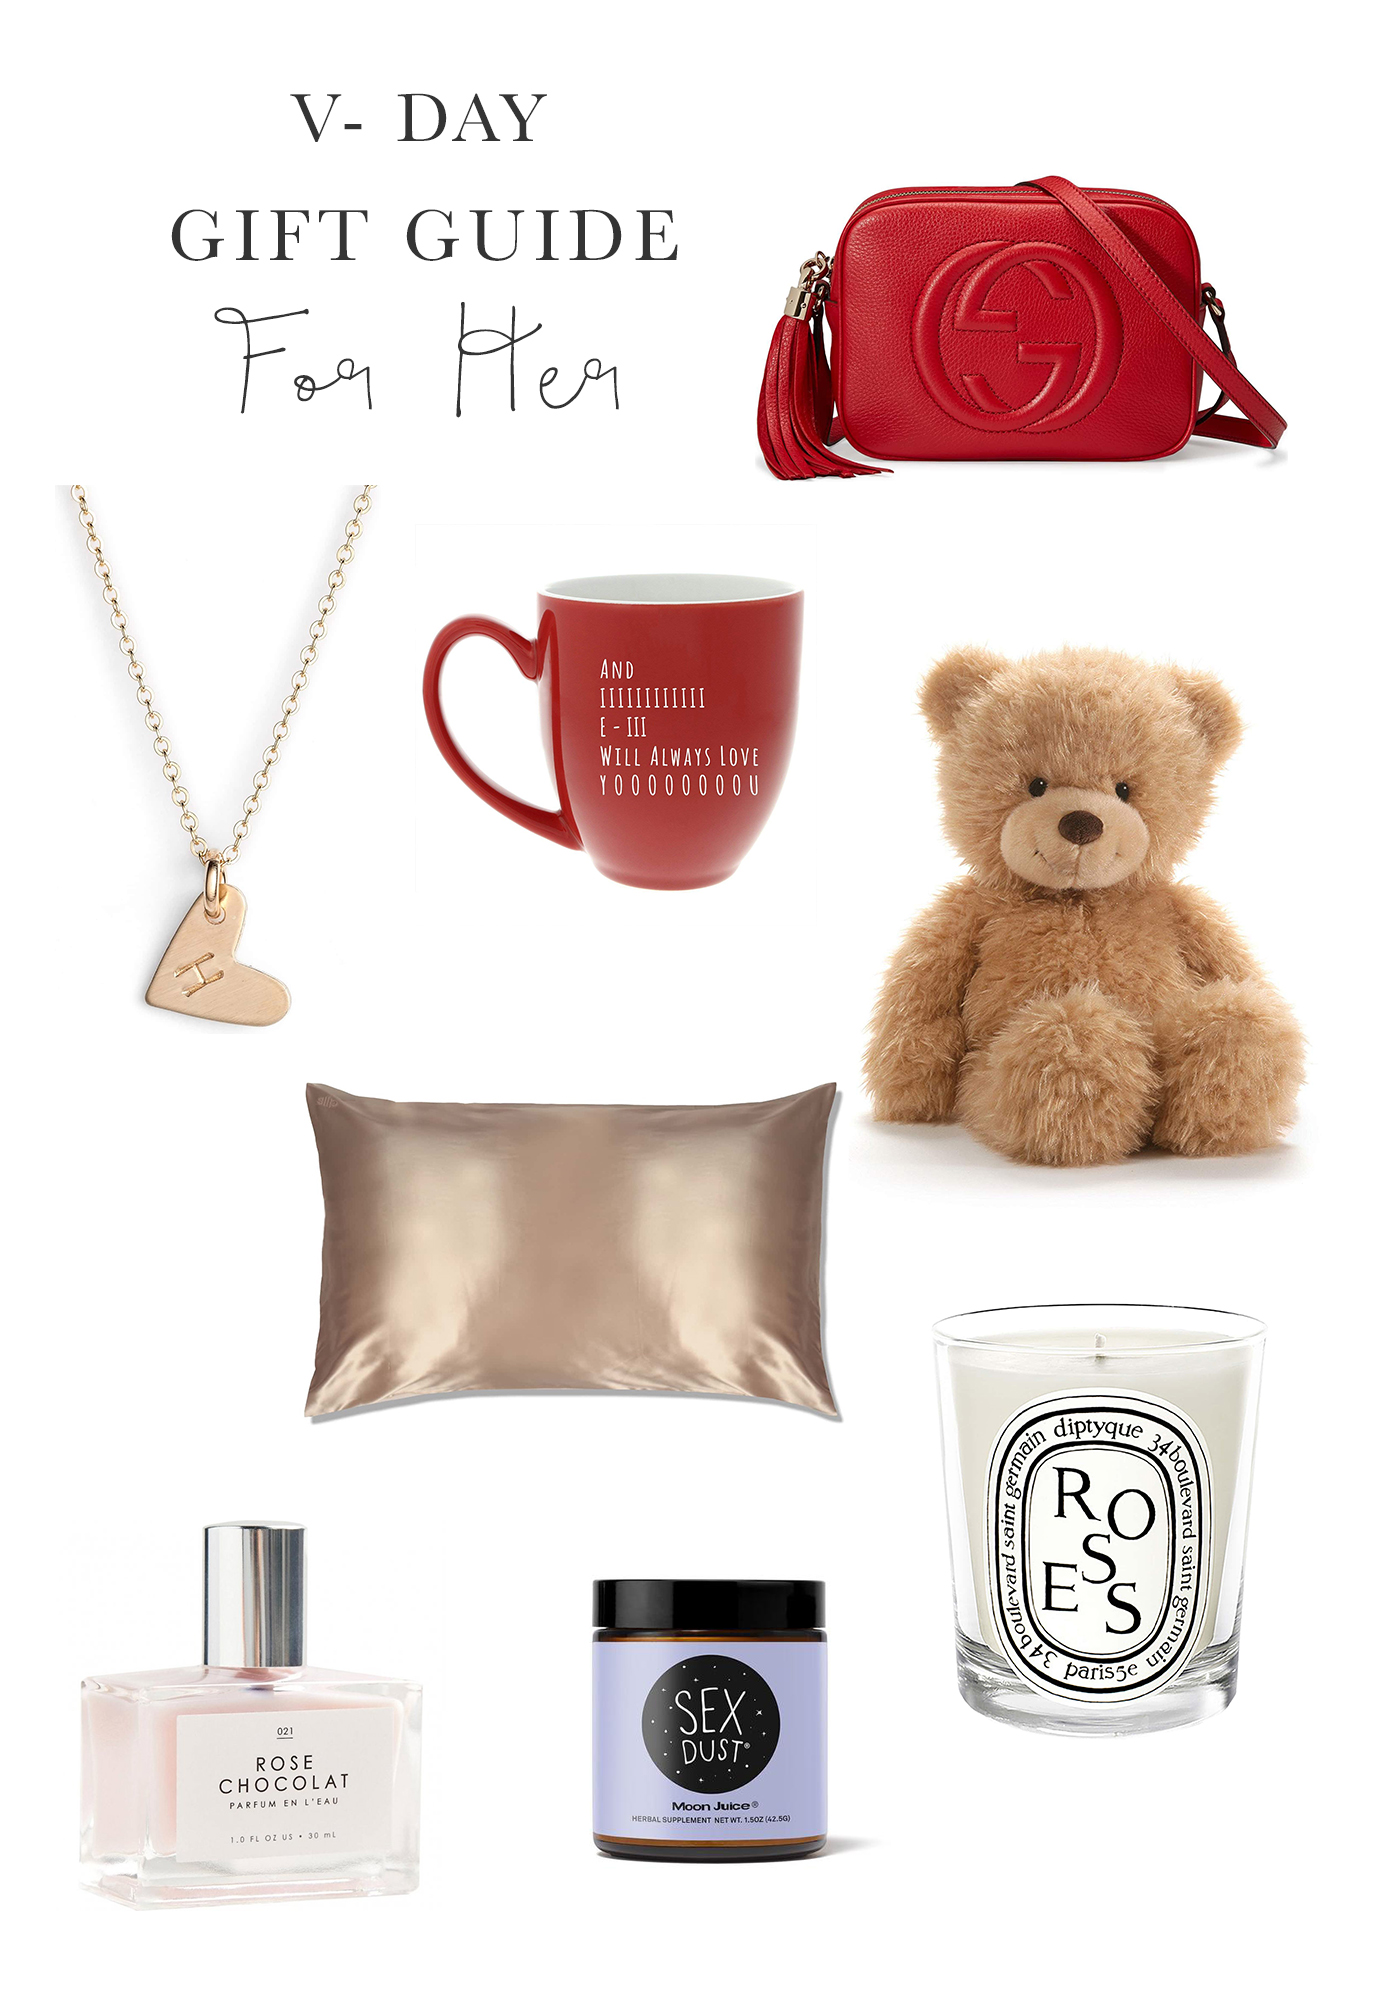 Valentine's Day Gift Guide for Her | Gifts for your Girlfriend | Valentine's Day | Blondie in the City by Hayley Larue